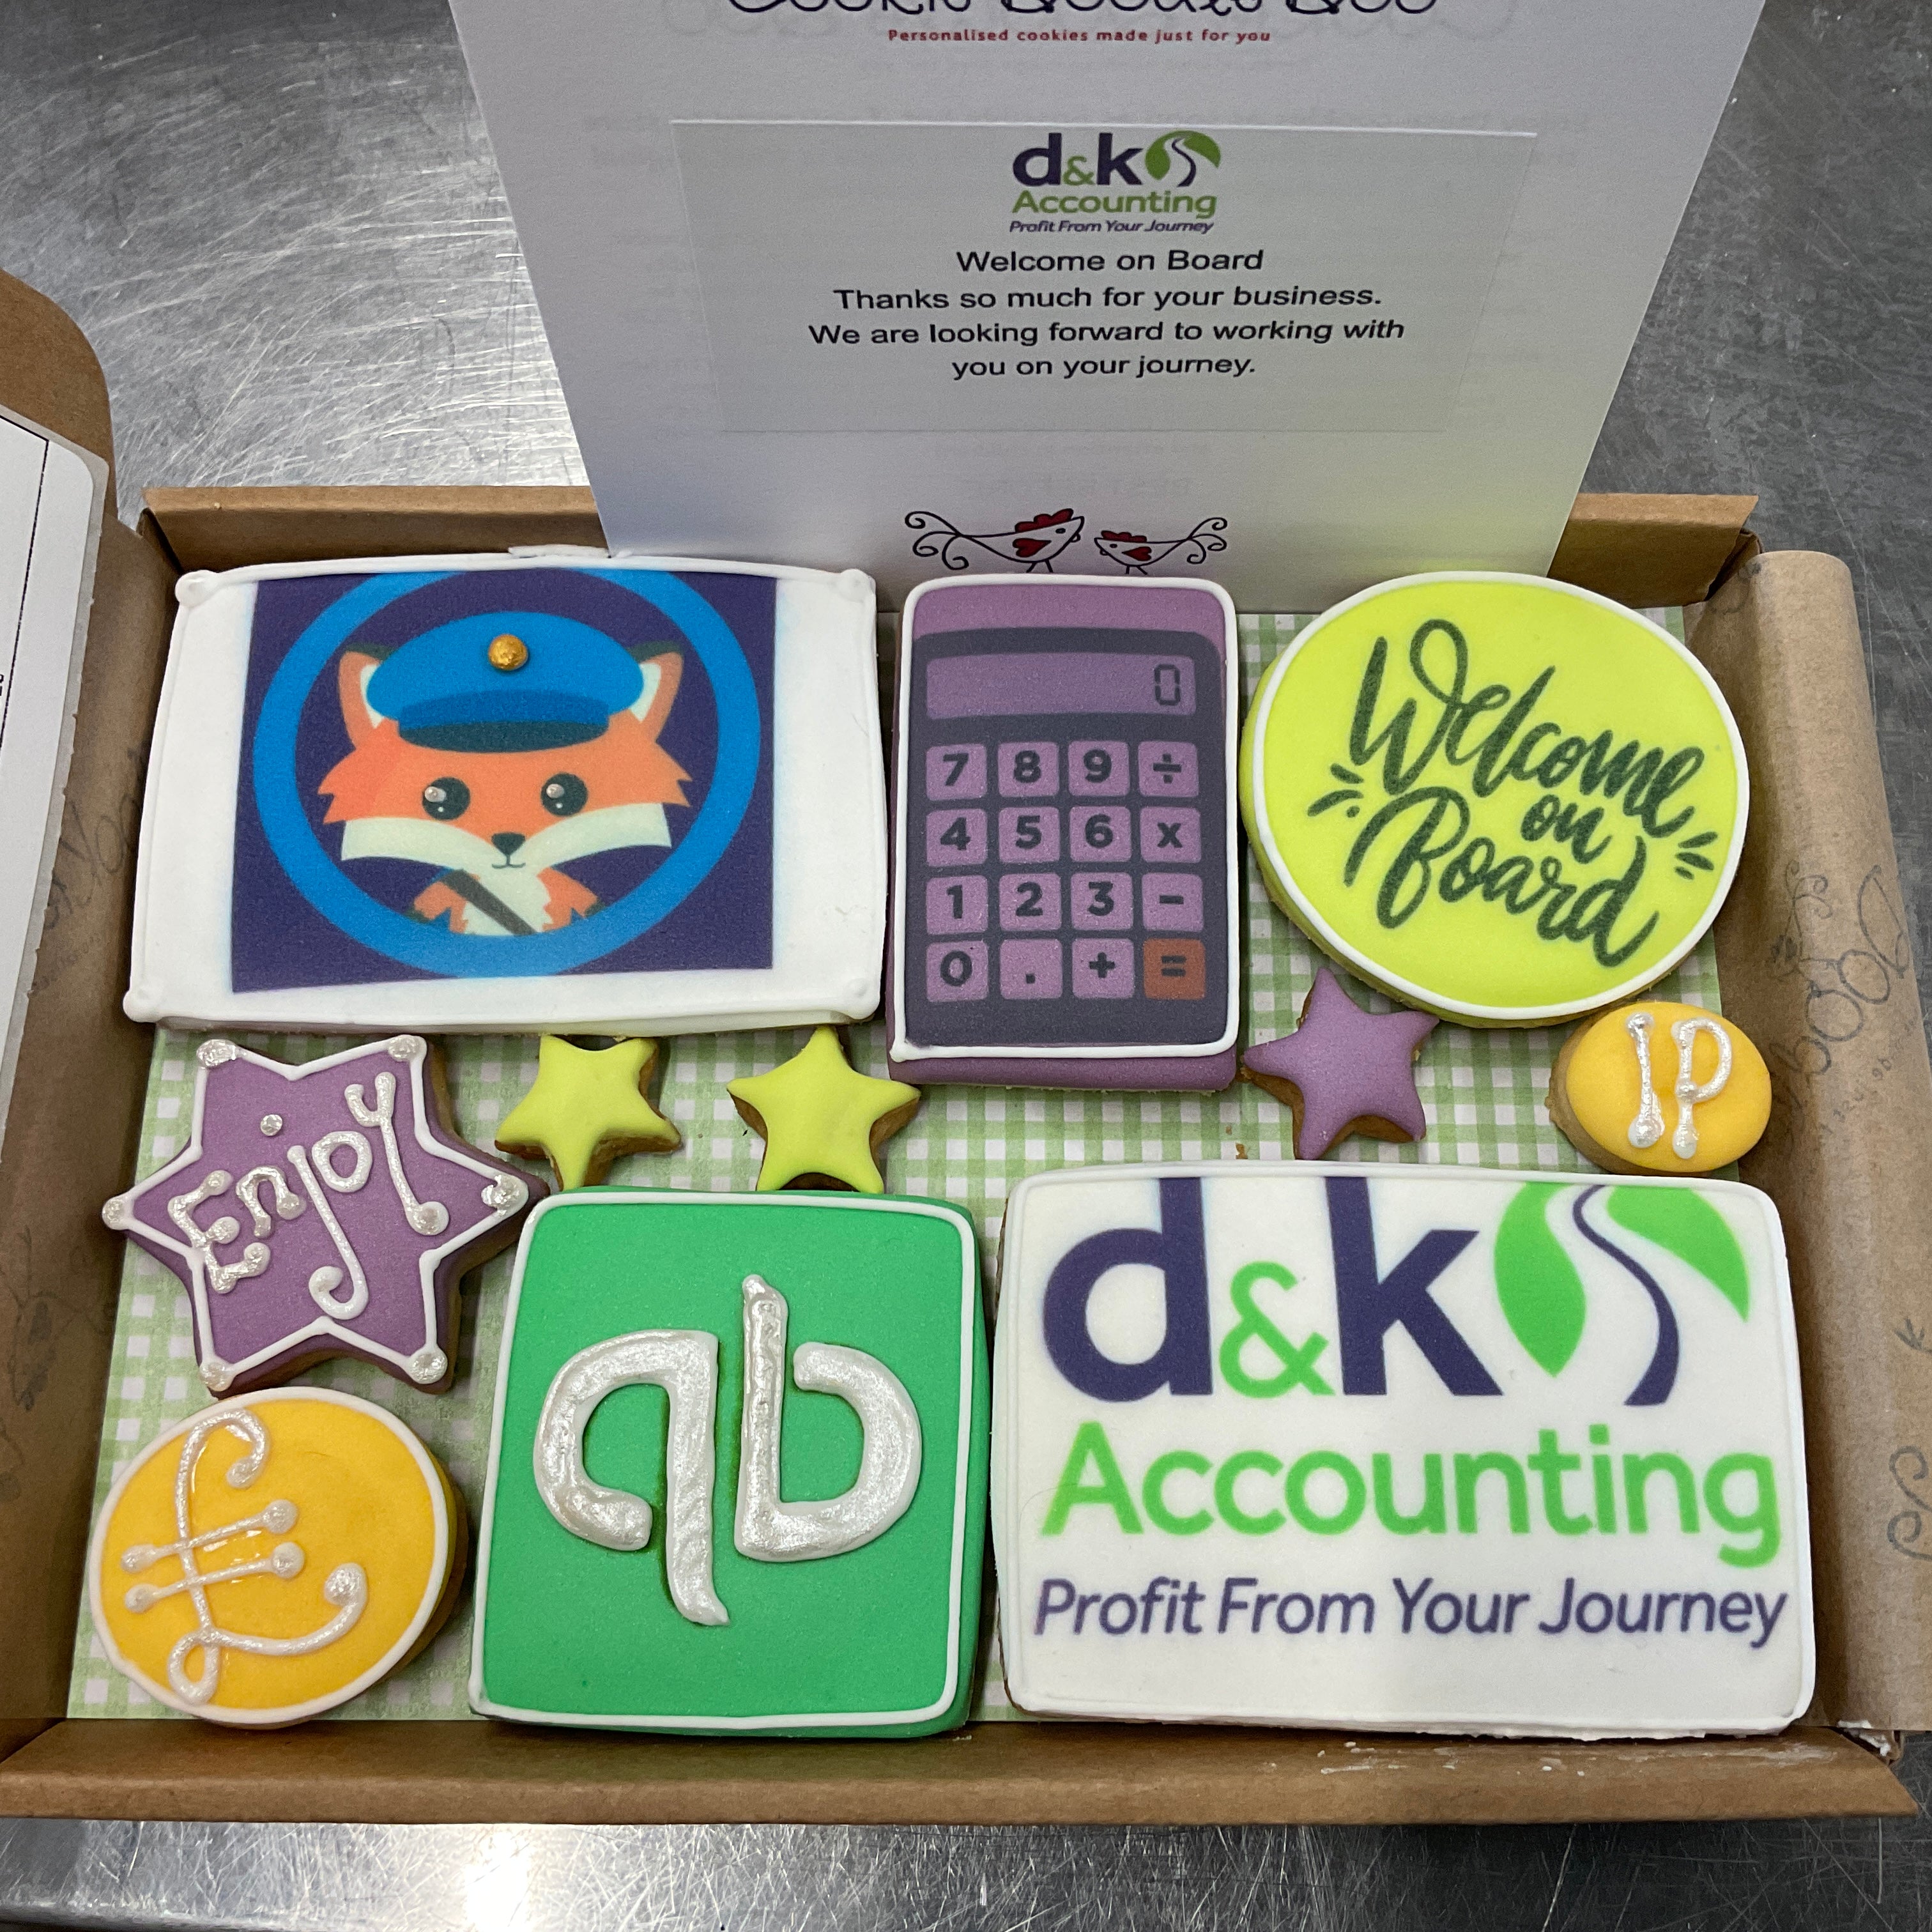 Welcome on board cookies for bookkeeper or accountant to send to new clients 